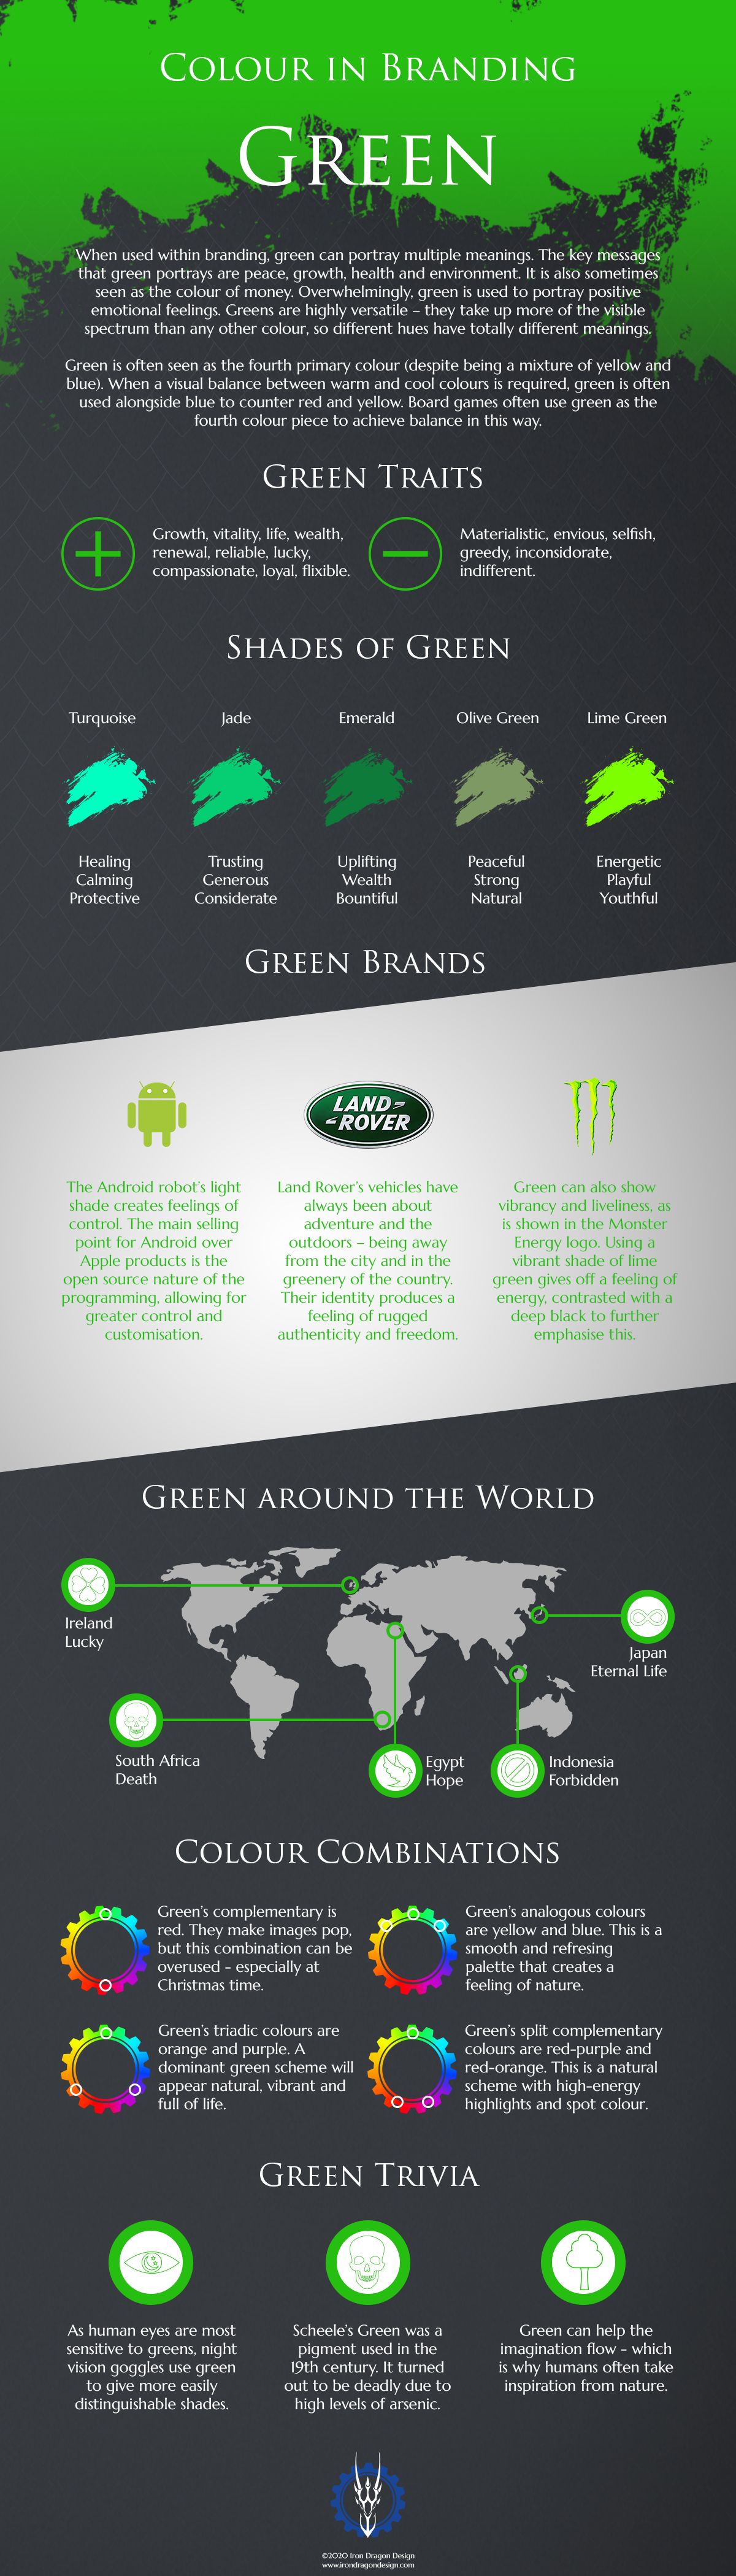 Colour in Branding Green Infographic